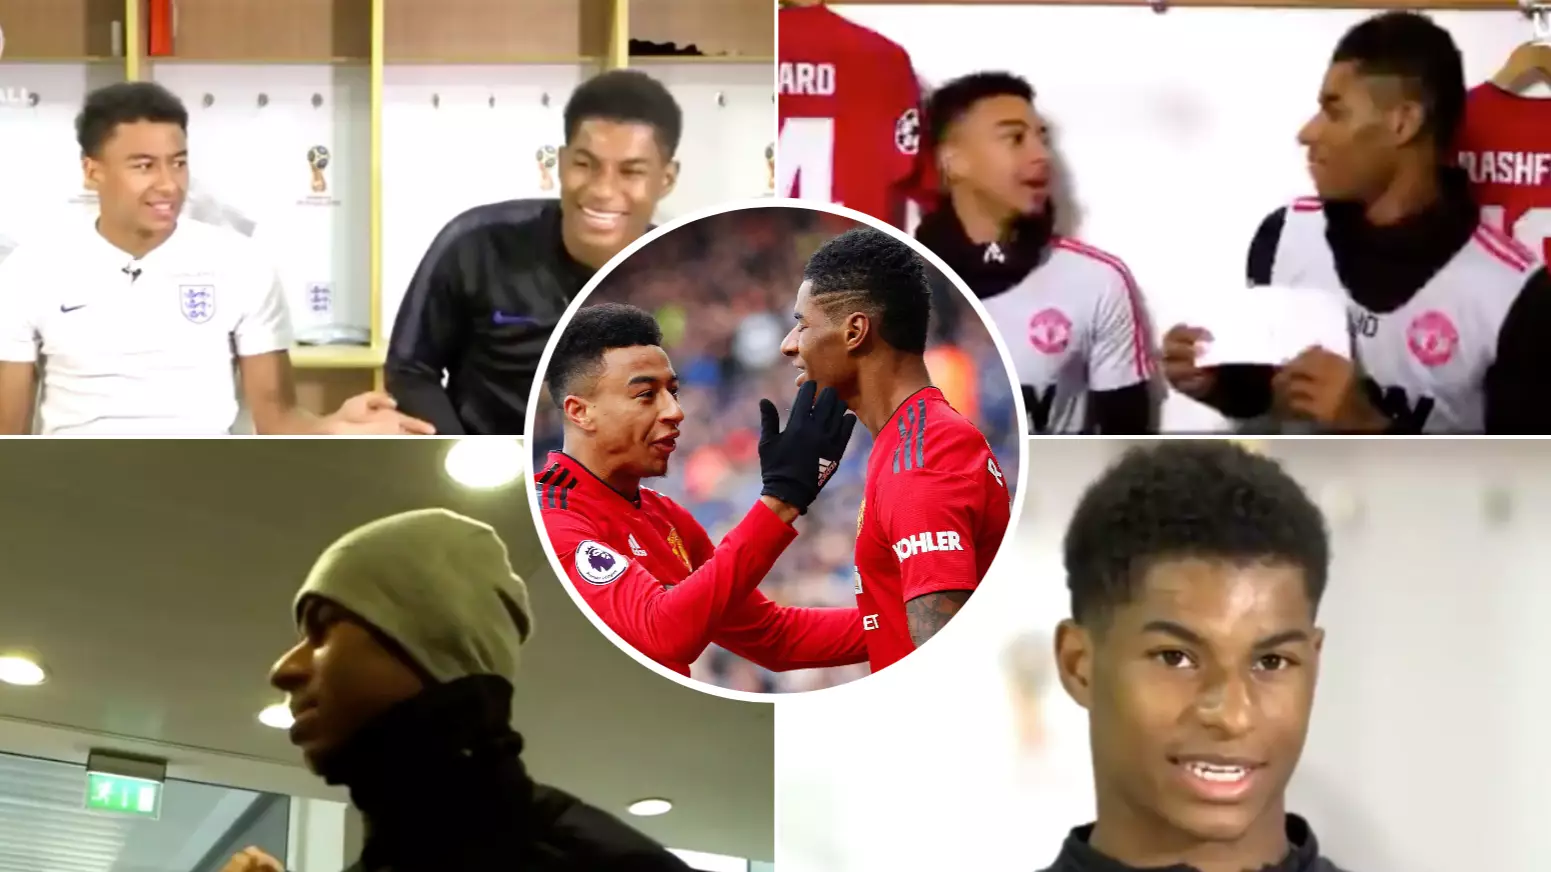 Thread Of Marcus Rashford And Jesse Lingard Arguing Over Pointless Things Is Brilliant